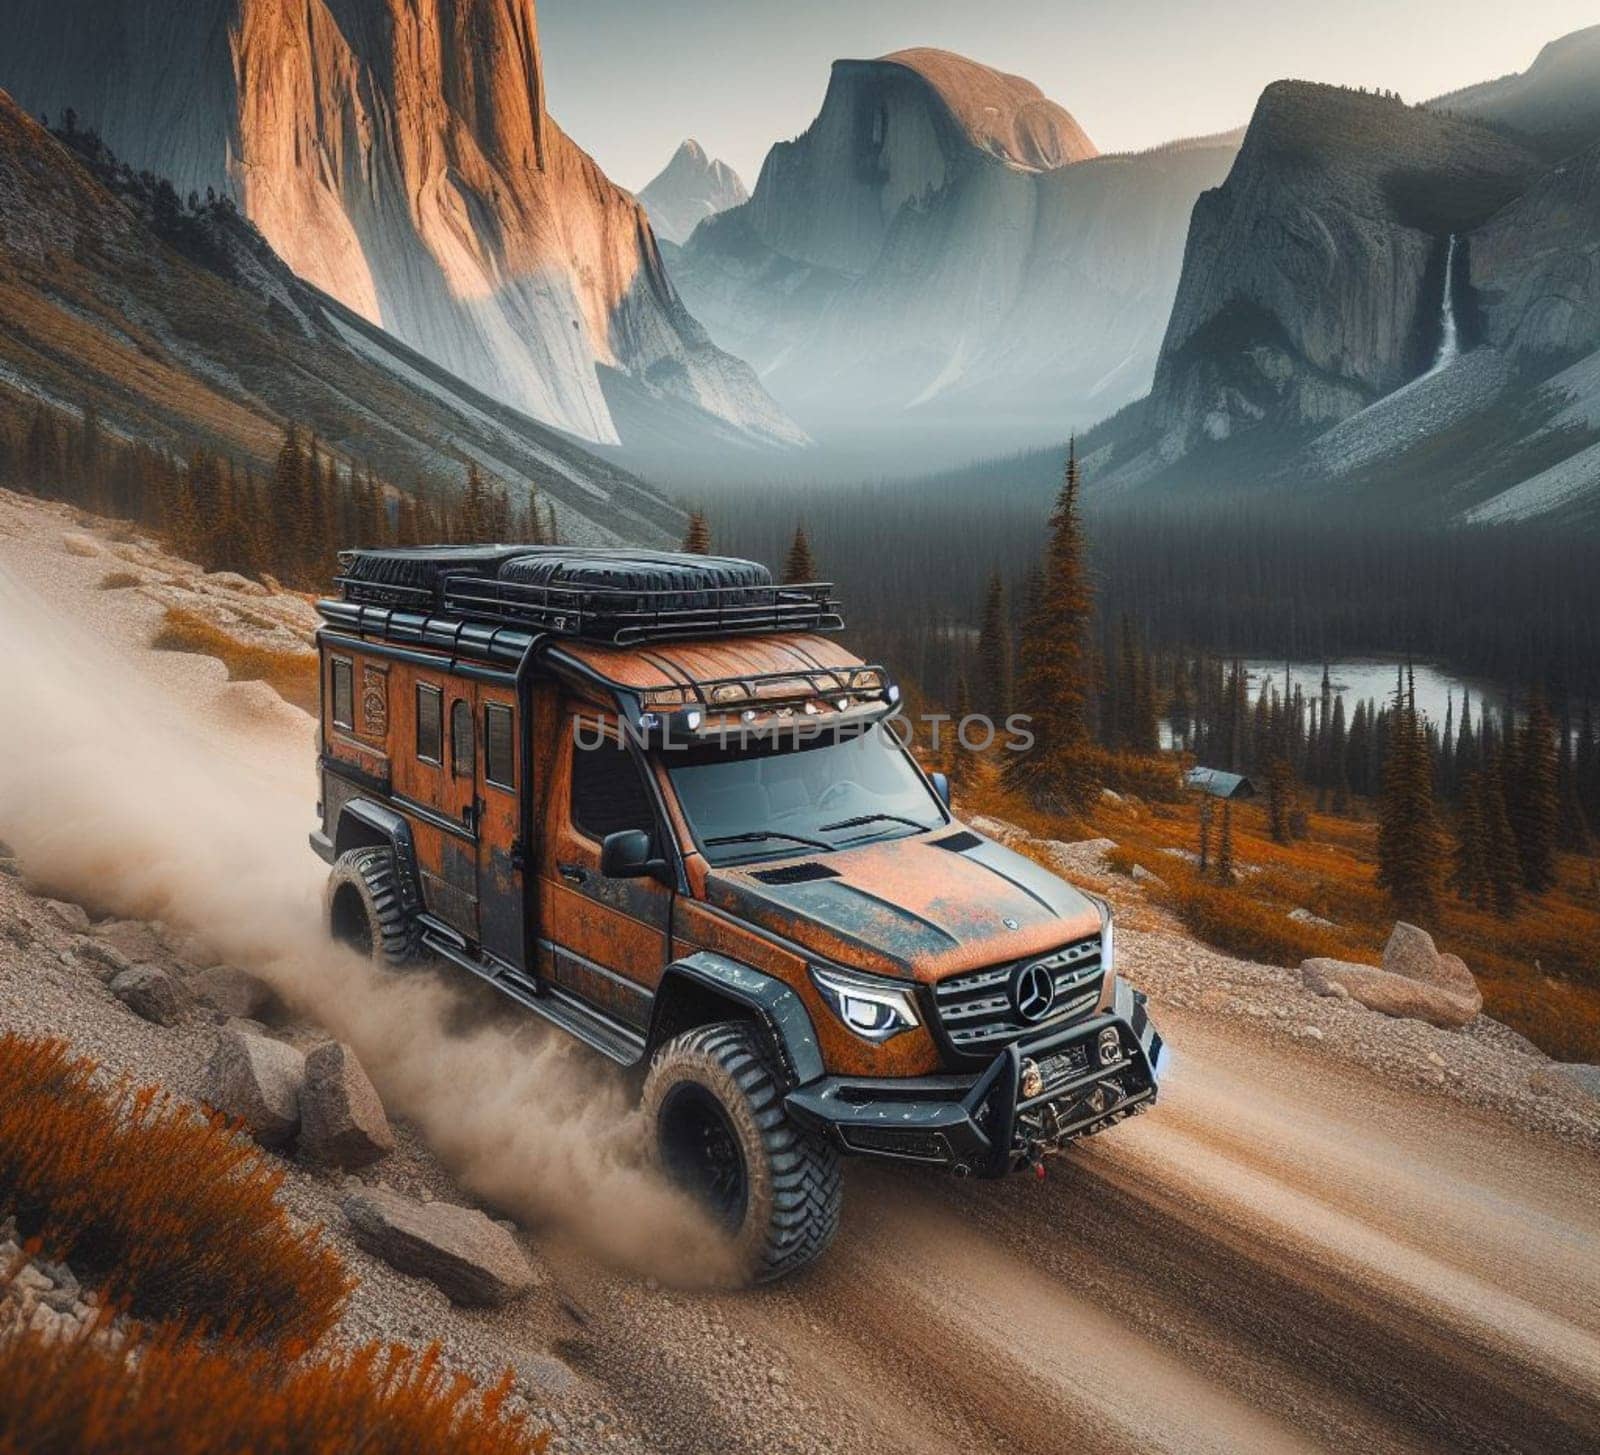 rusty dirt offroad 4x4 lifted vintage custom camper conversion jeep overlanding in mountain roads, nomadic lifestyle, adventure living, ai generated